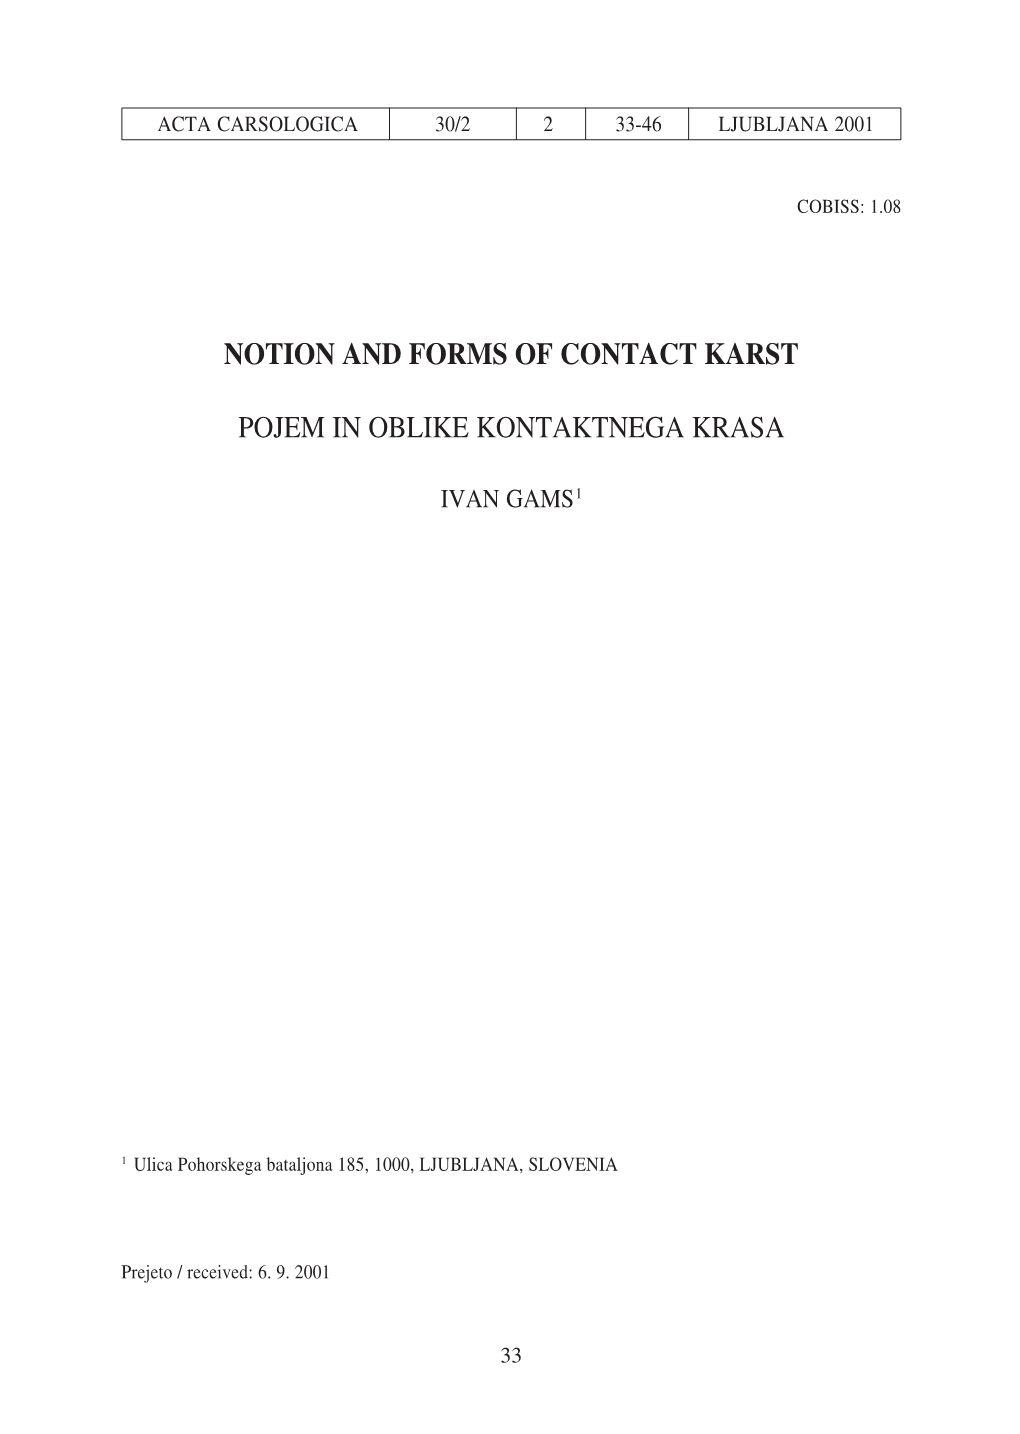 Notion and Forms of Contact Karst Pojem in Oblike